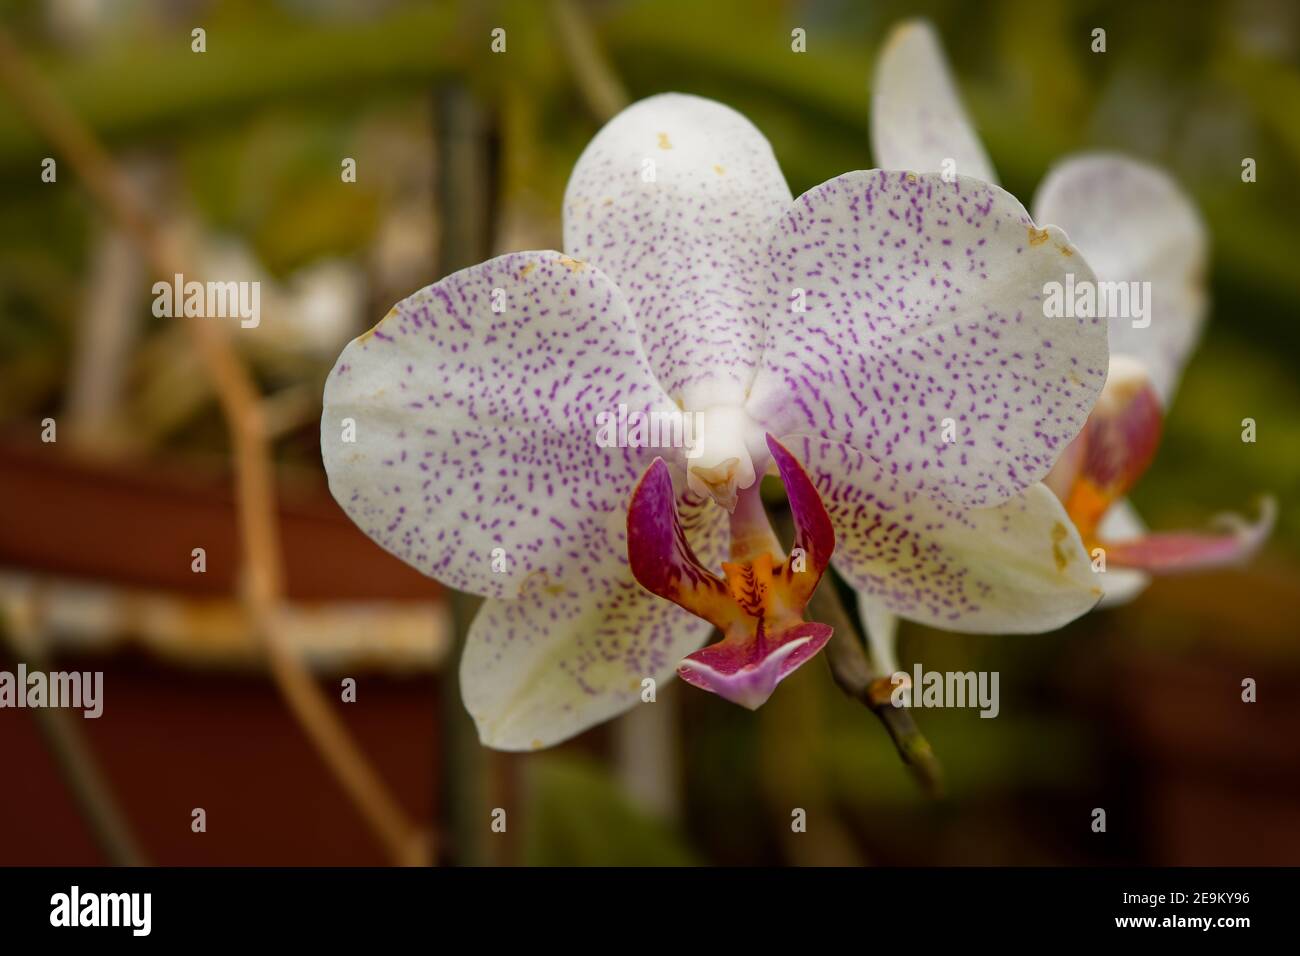 White orchid on blurred background, close-up photo of tropical flower Stock Photo